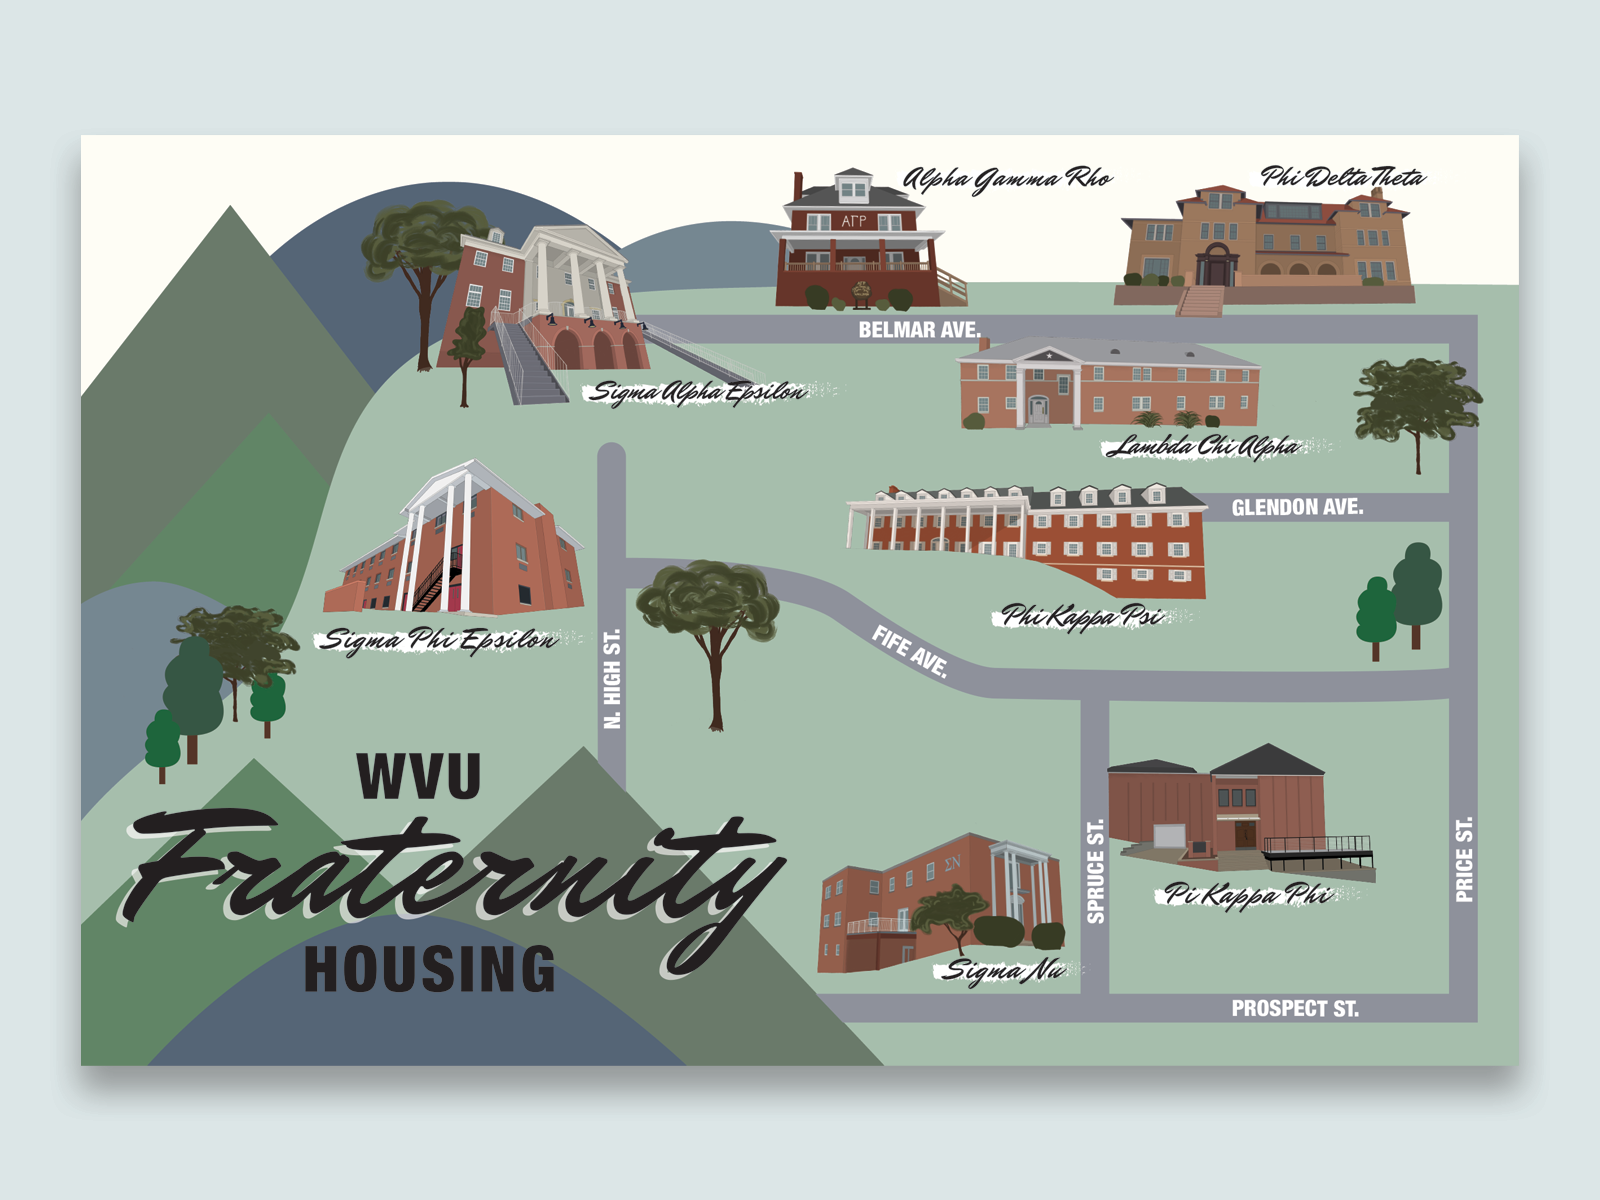 Wvu Fraternity Housing By Maggie Mclister On Dribbble